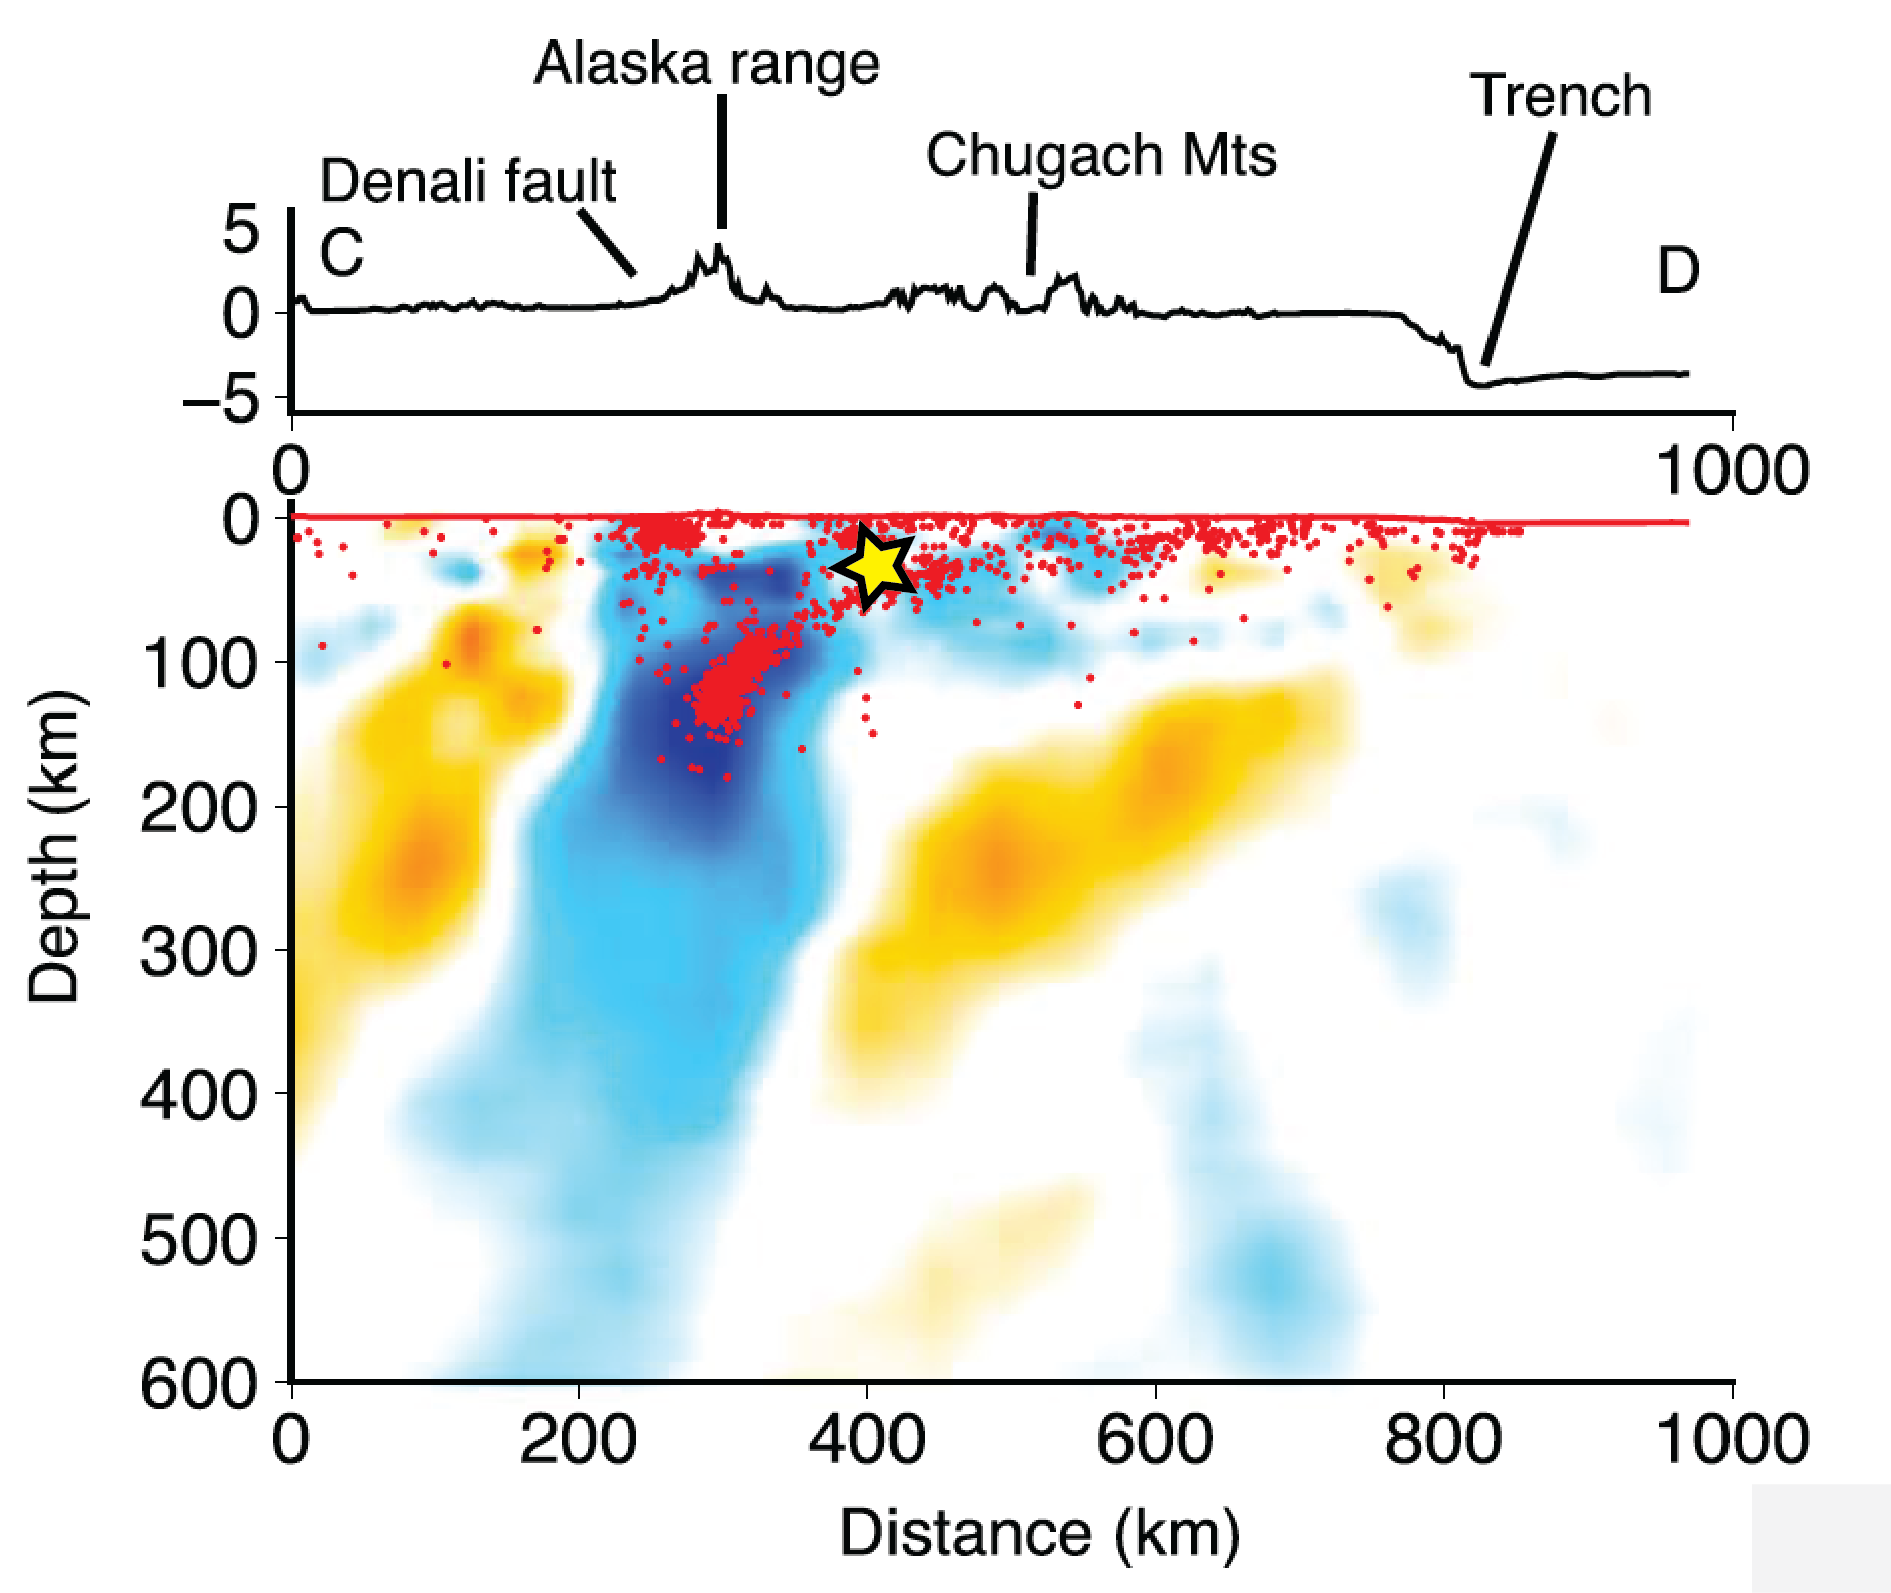 Tomography image showing cross section of Pacific Plate under Alaska as a blue region sinking between two yellow regions. Red dots in the top middle of the blue region and all along the top of the image indicate earthquakes at different locations and depths.